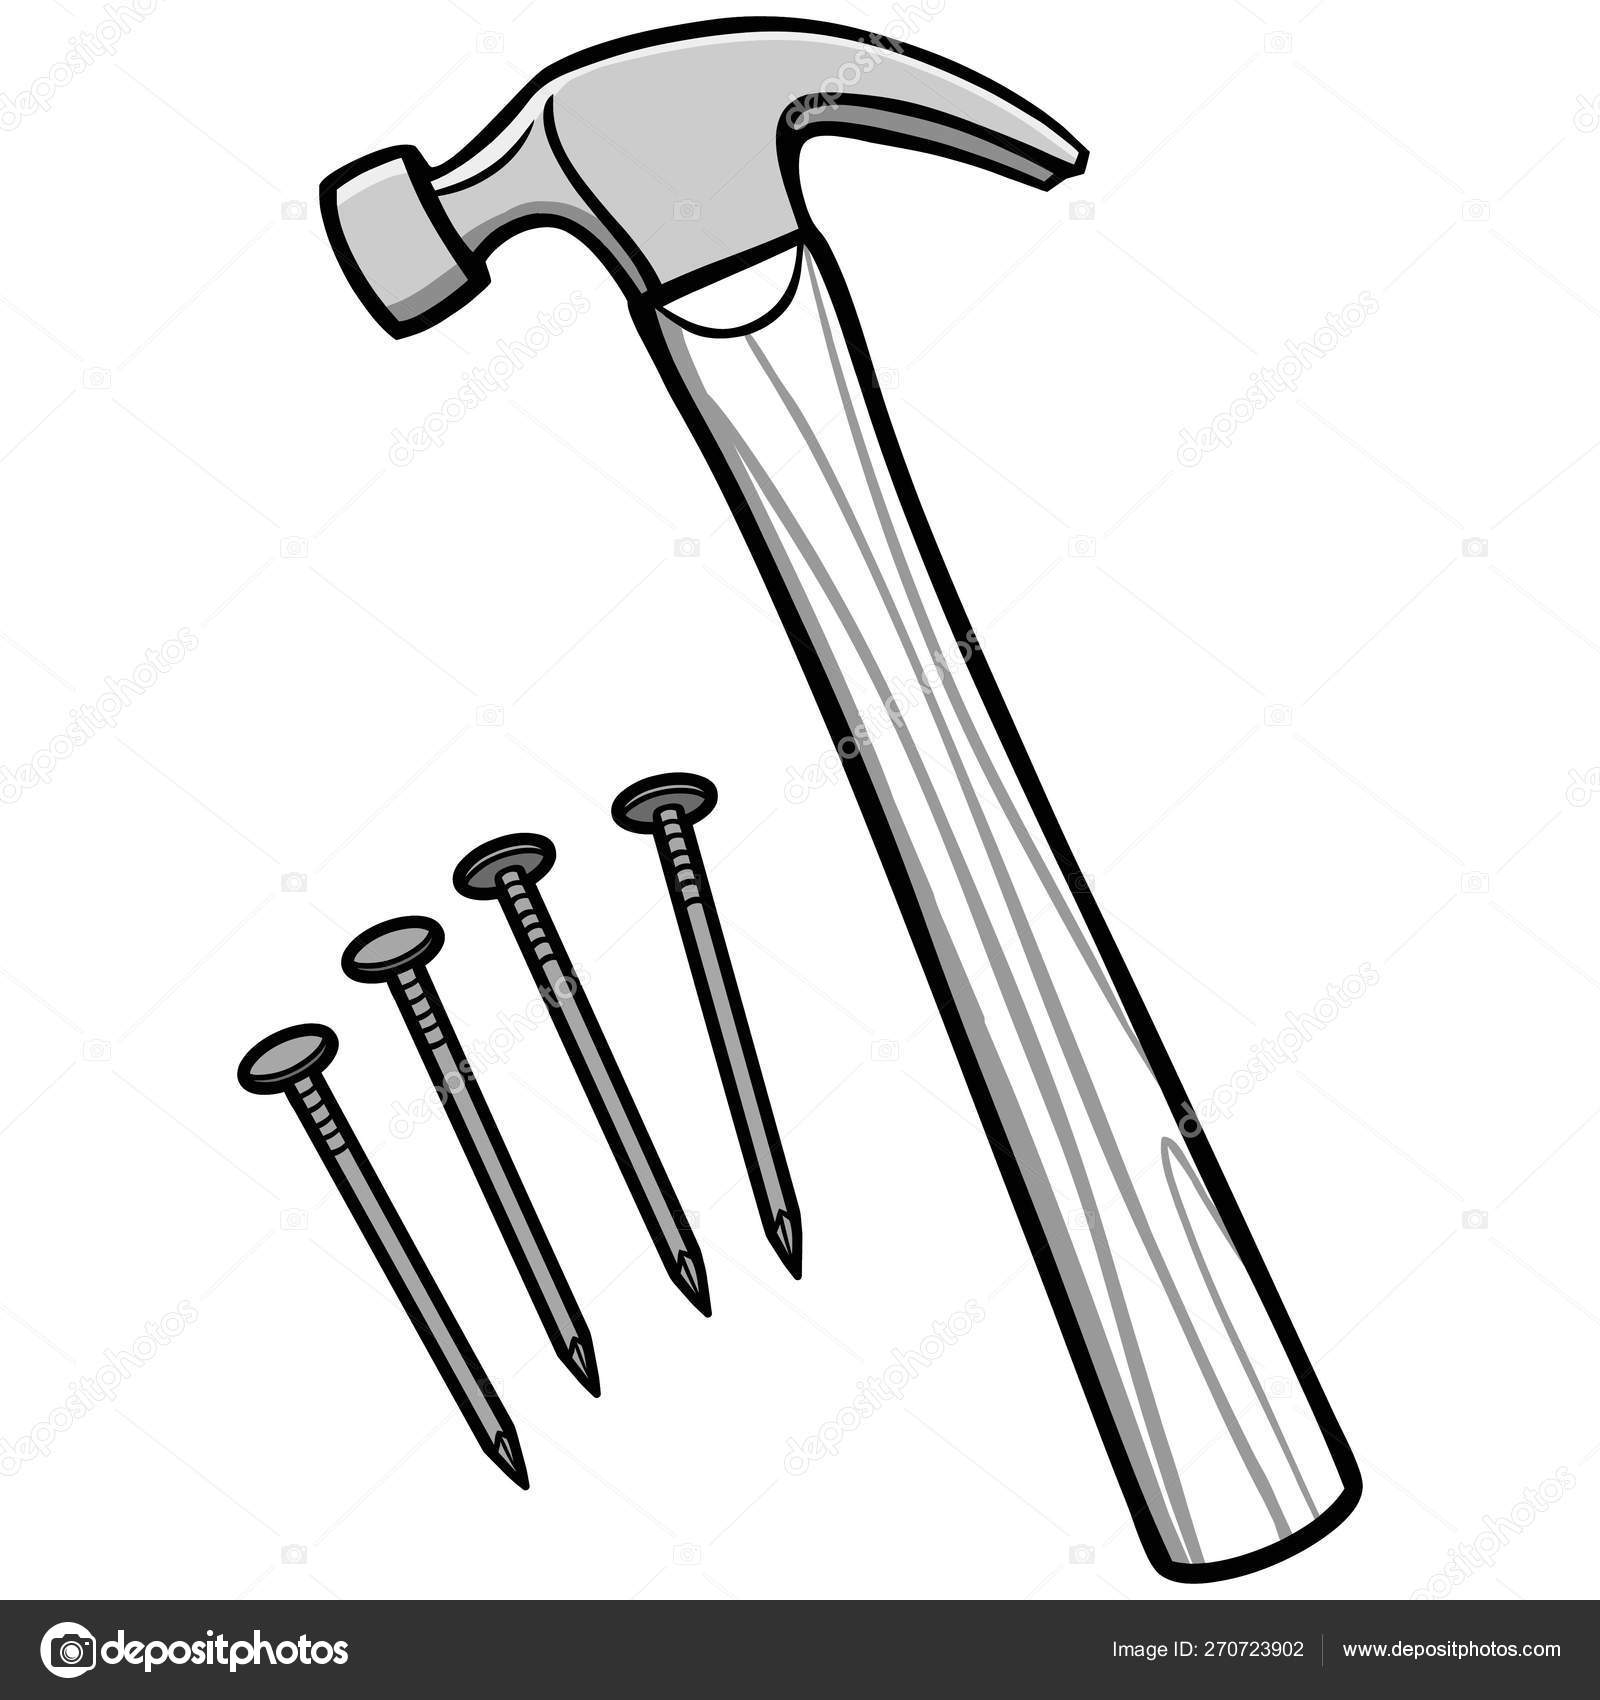 File:Hammer and nails.jpg - Wikimedia Commons